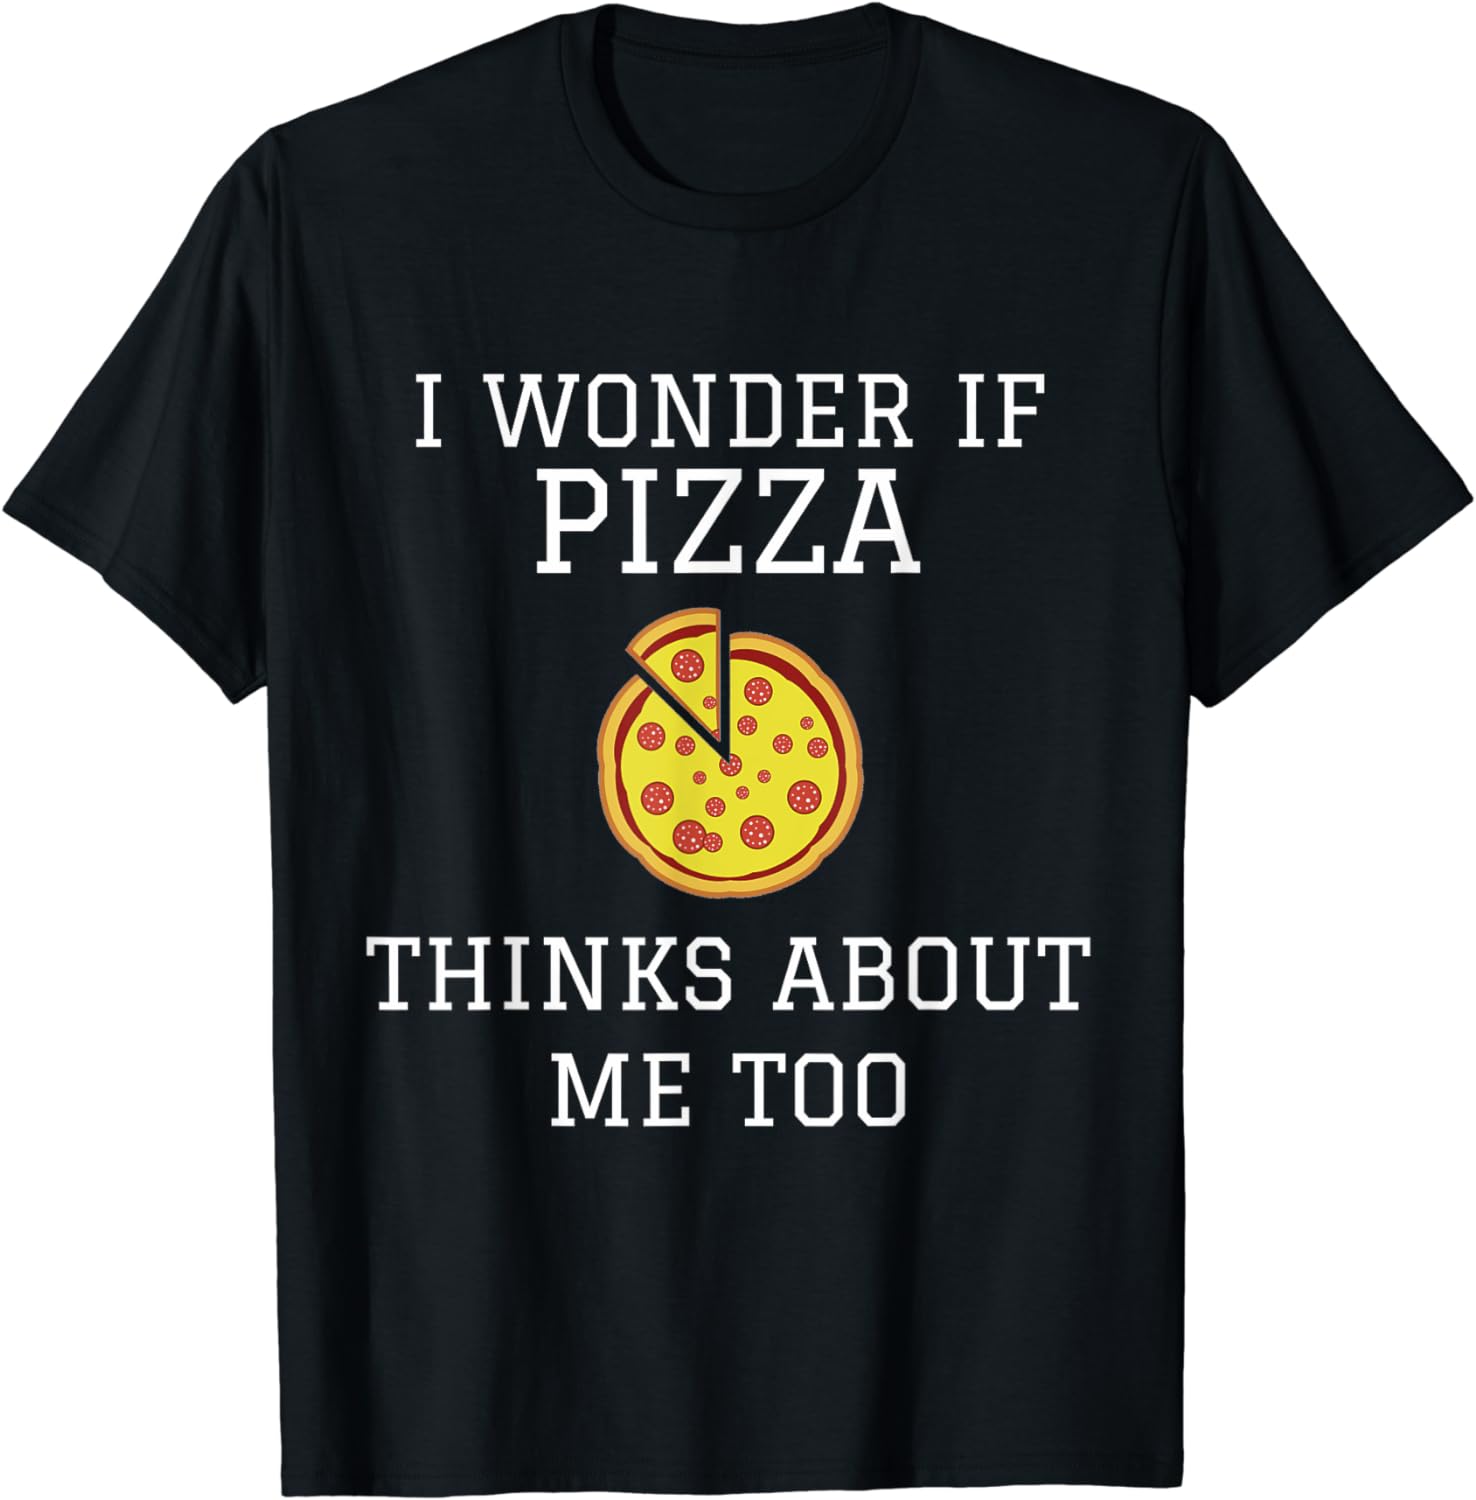 best pizza t-shirts to give as gifts